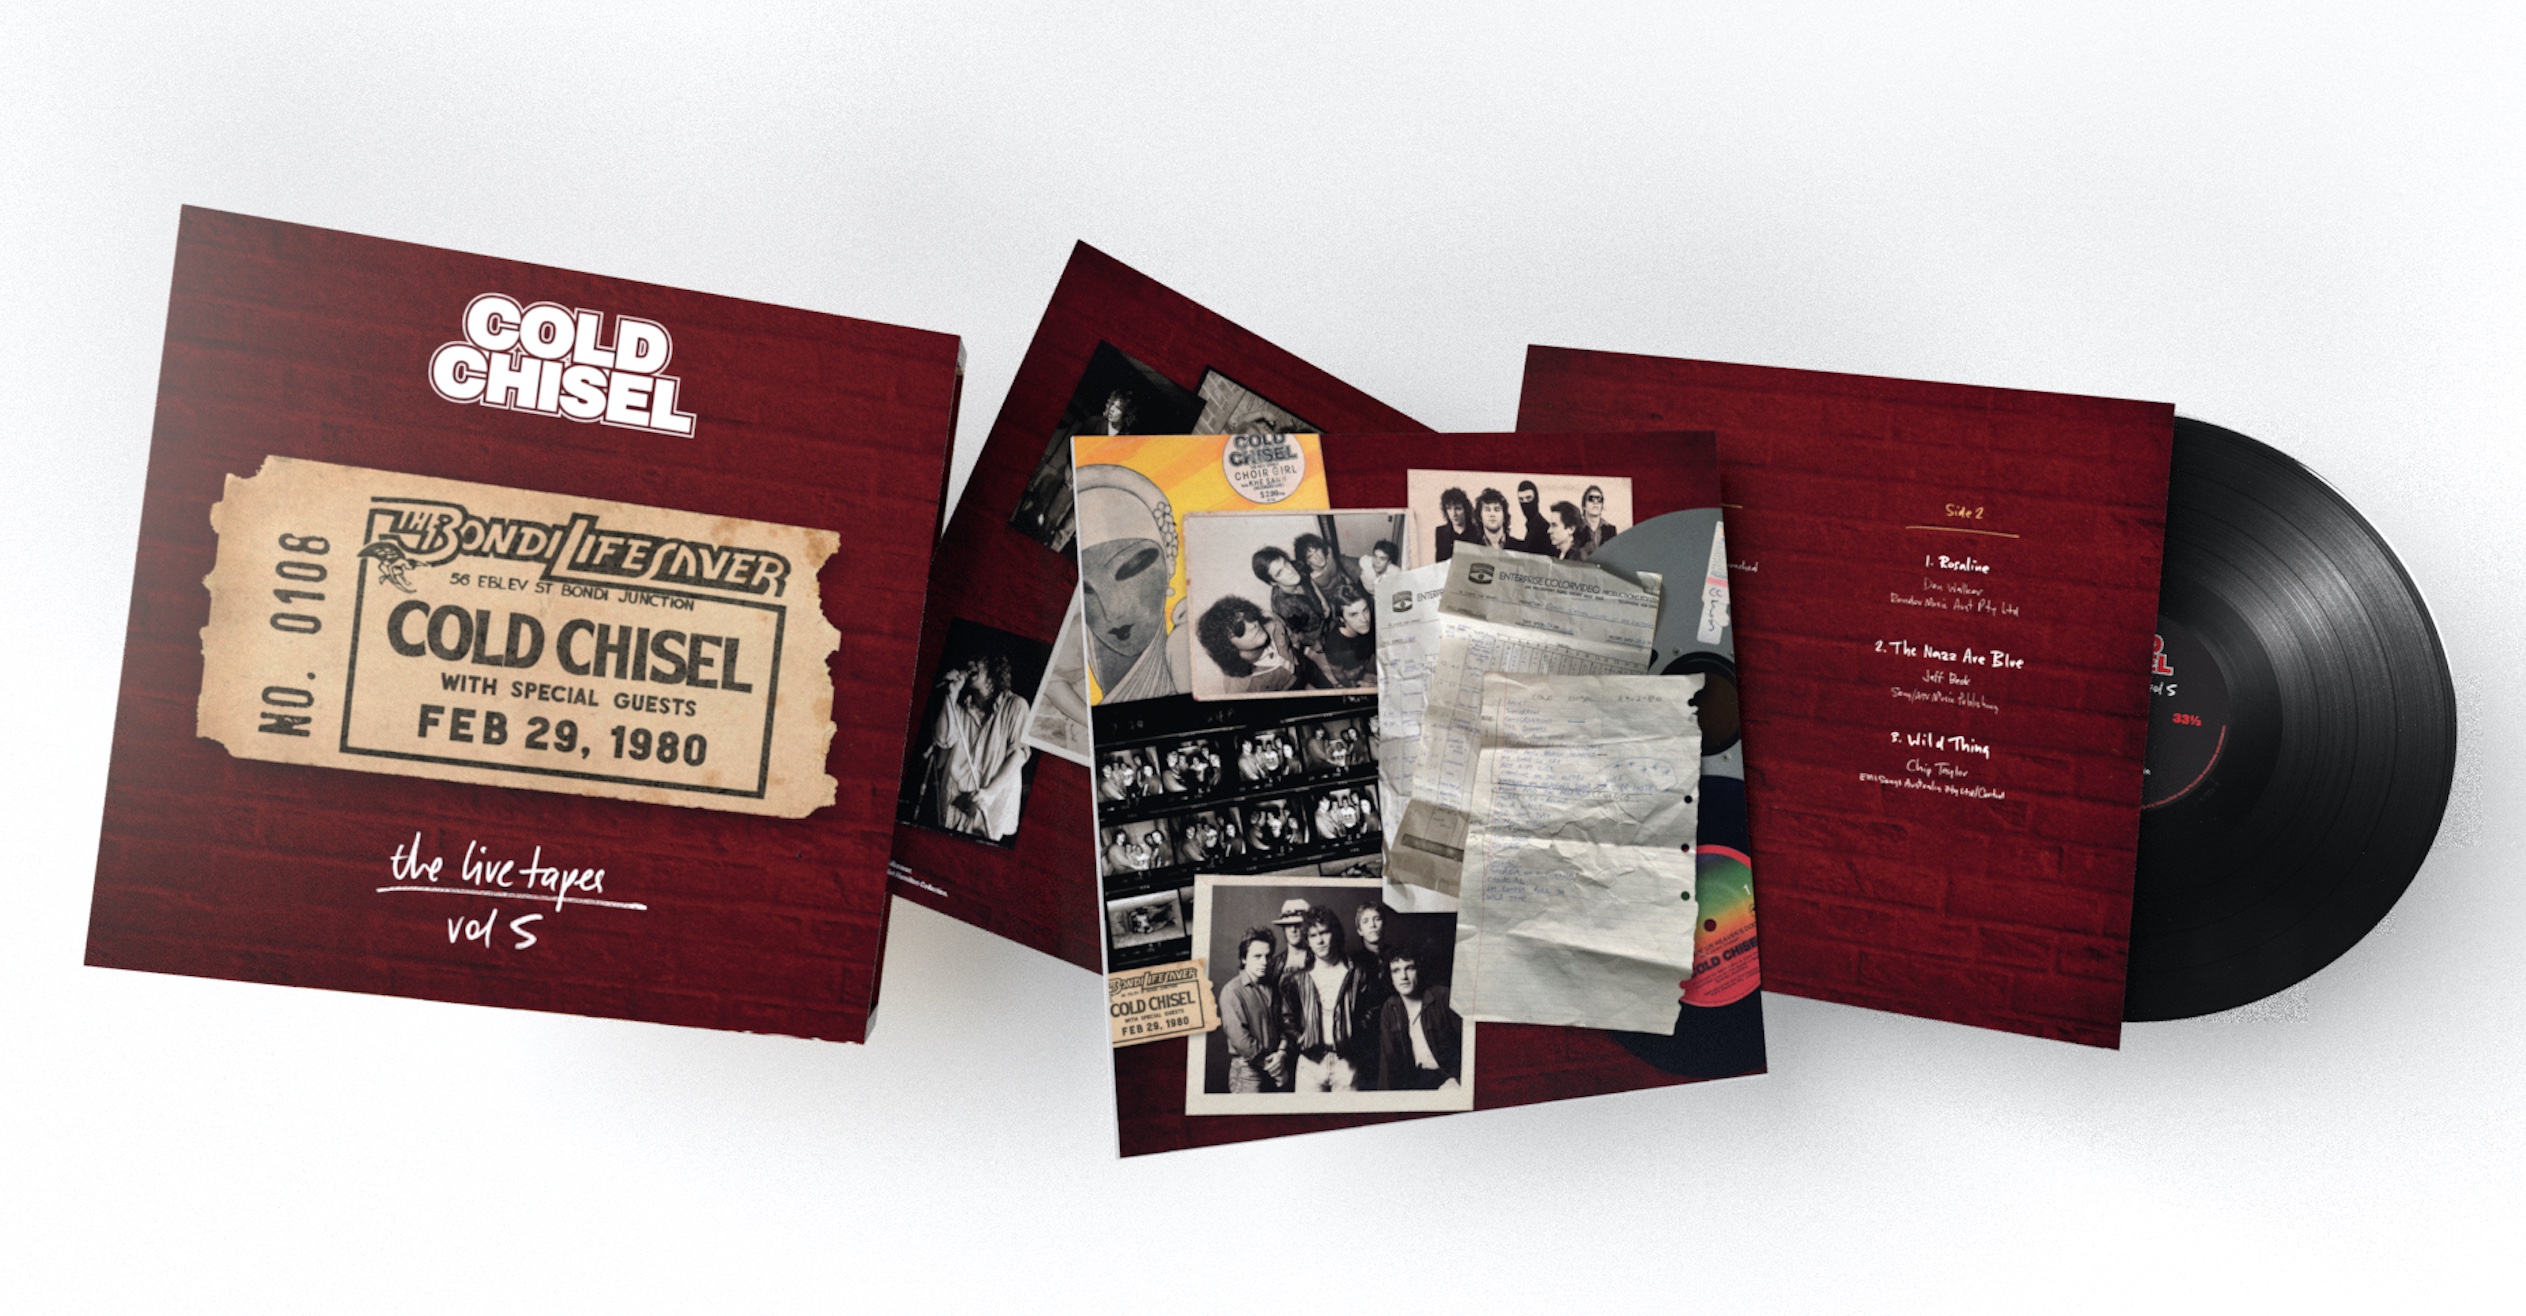 COLD CHISEL Announce the next instalment in their archival ‘Live Tapes’ series